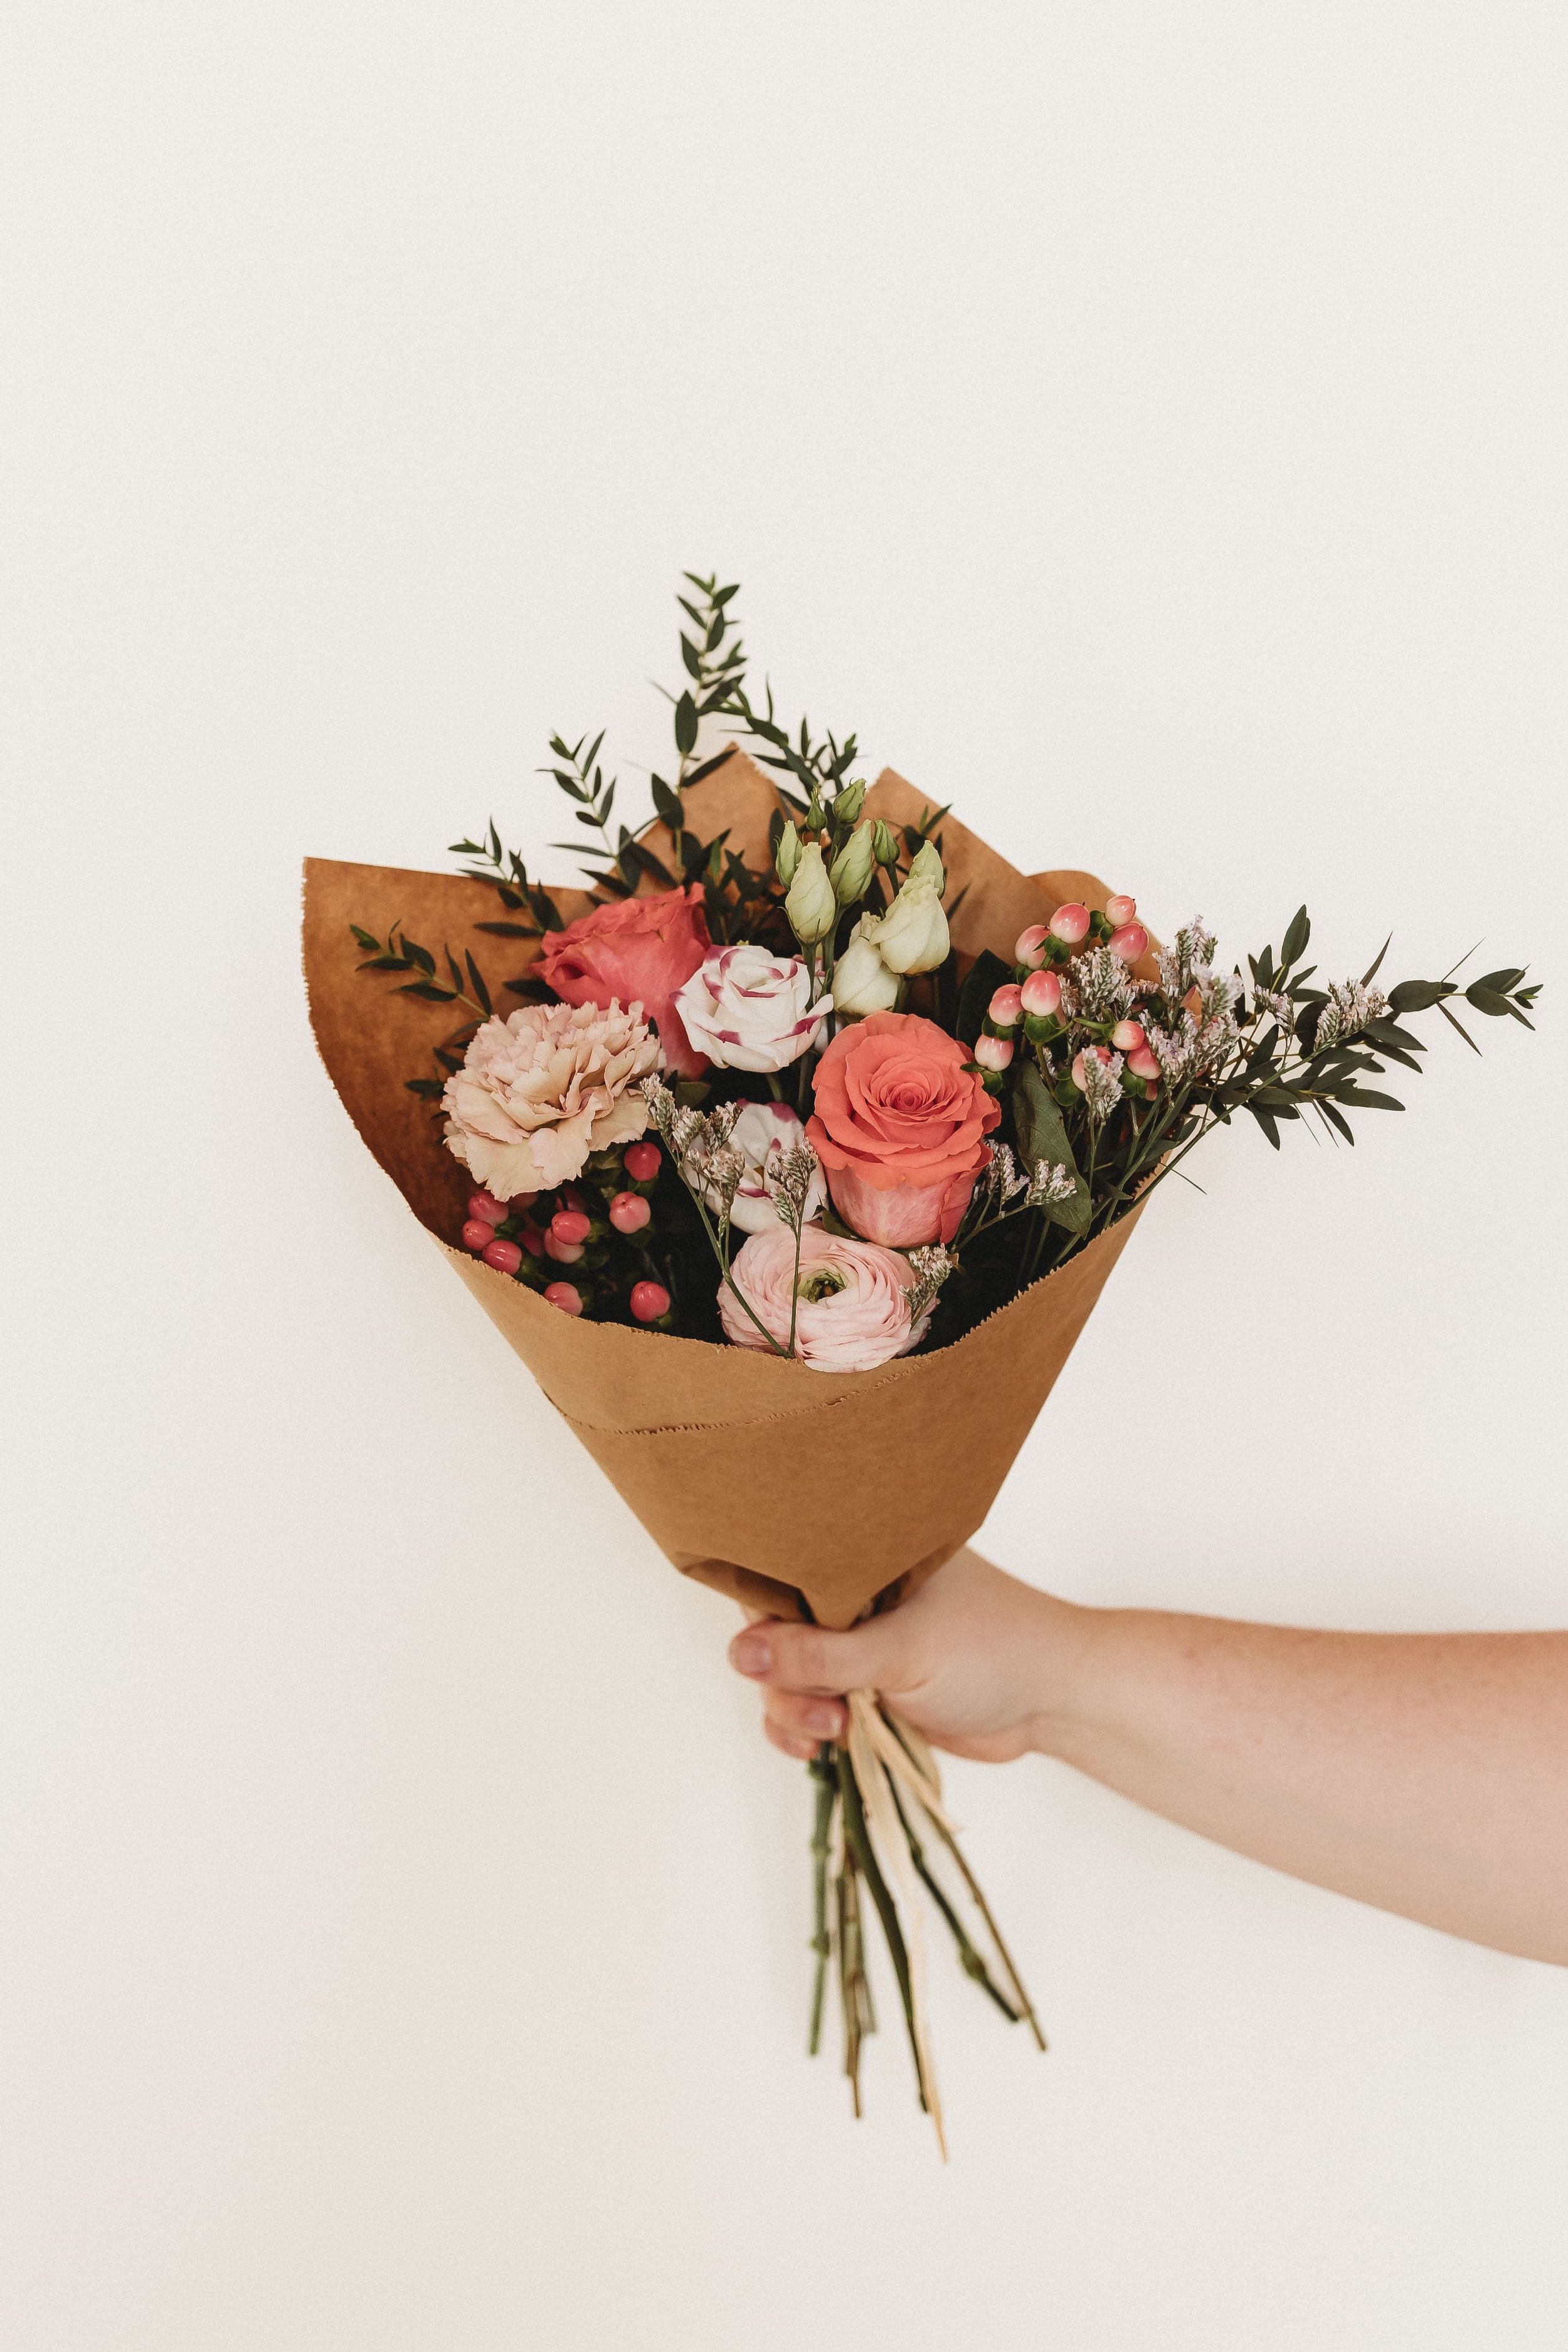  an arm holds out a hand tied bouquet of flowers wrapped in brown paper for business branding photography 